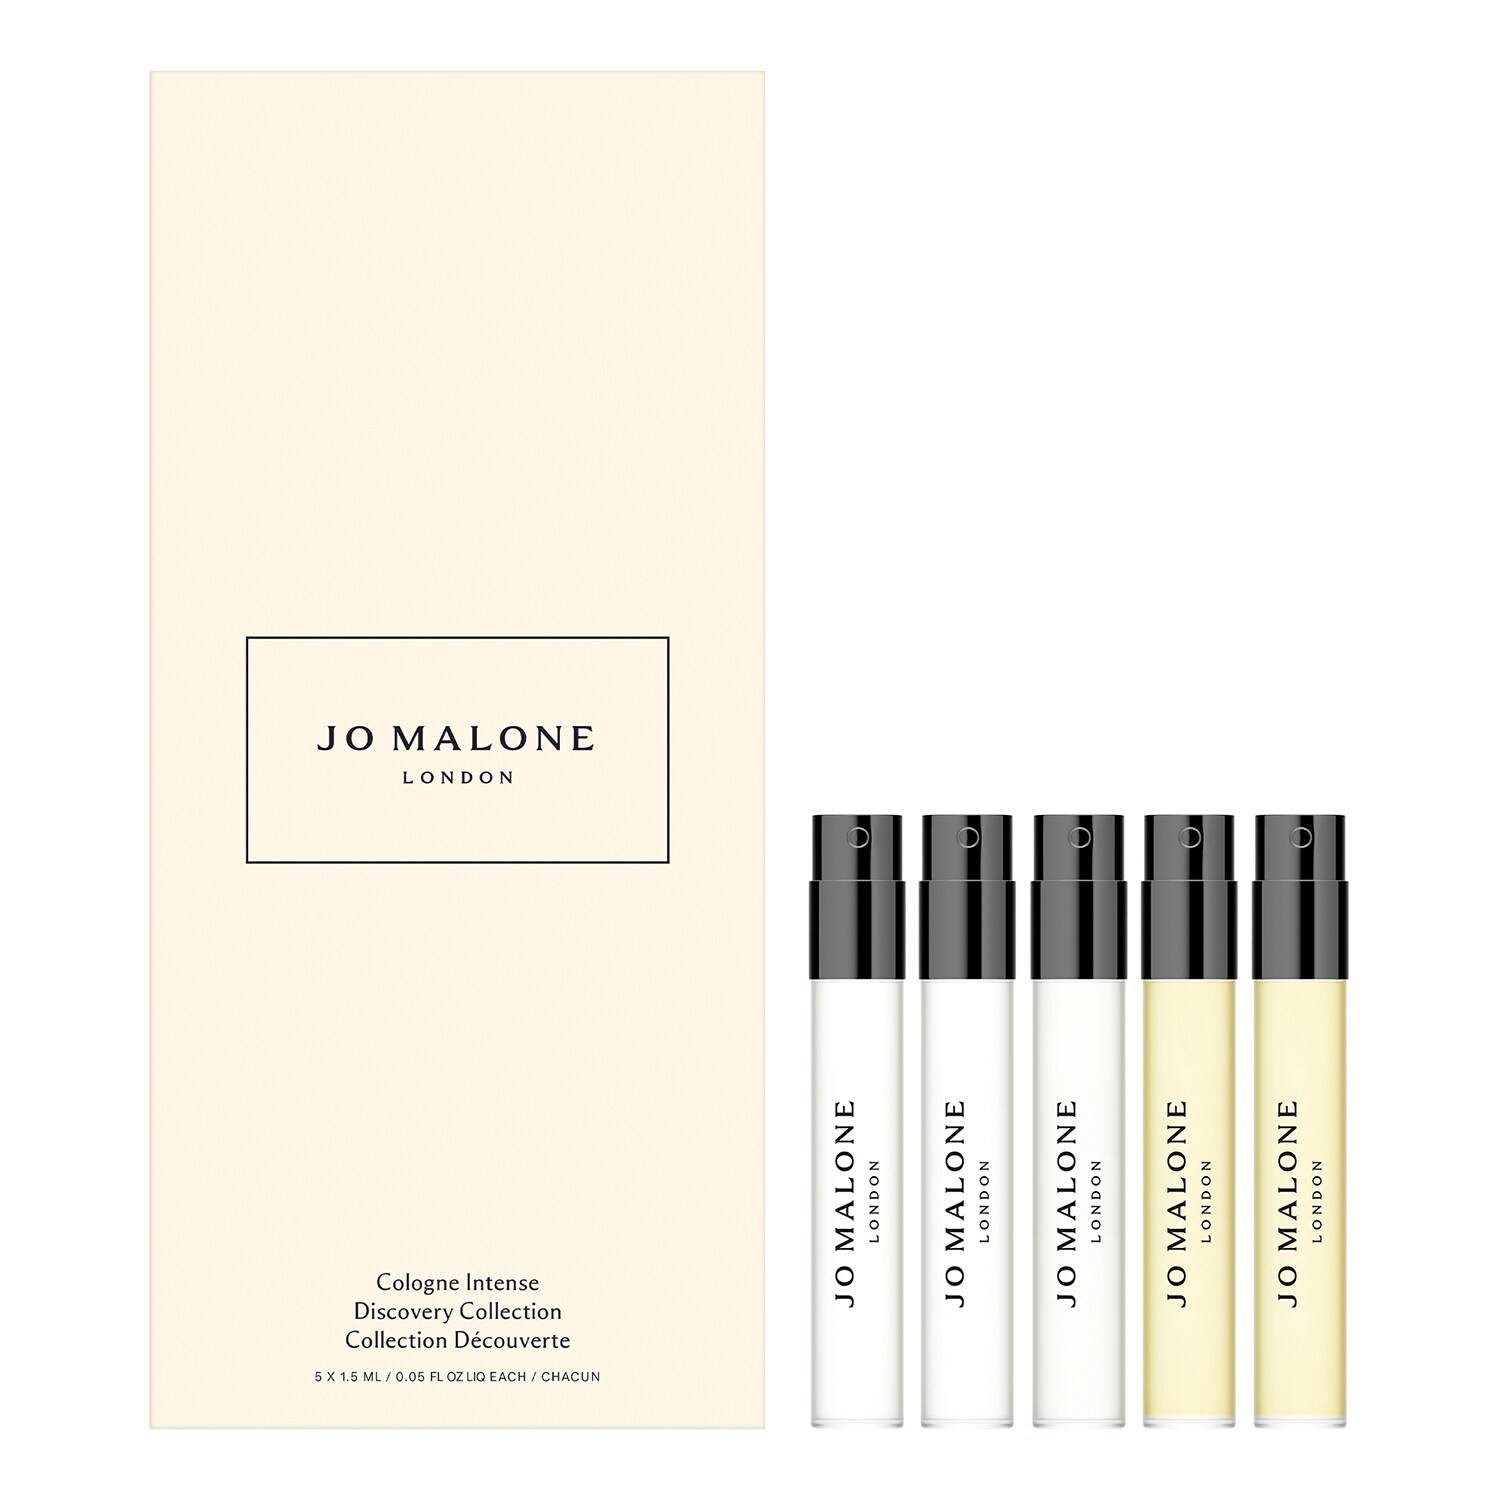 Jo Malone London Cologne Intense Discovery Collection 5 X 1,5Ml